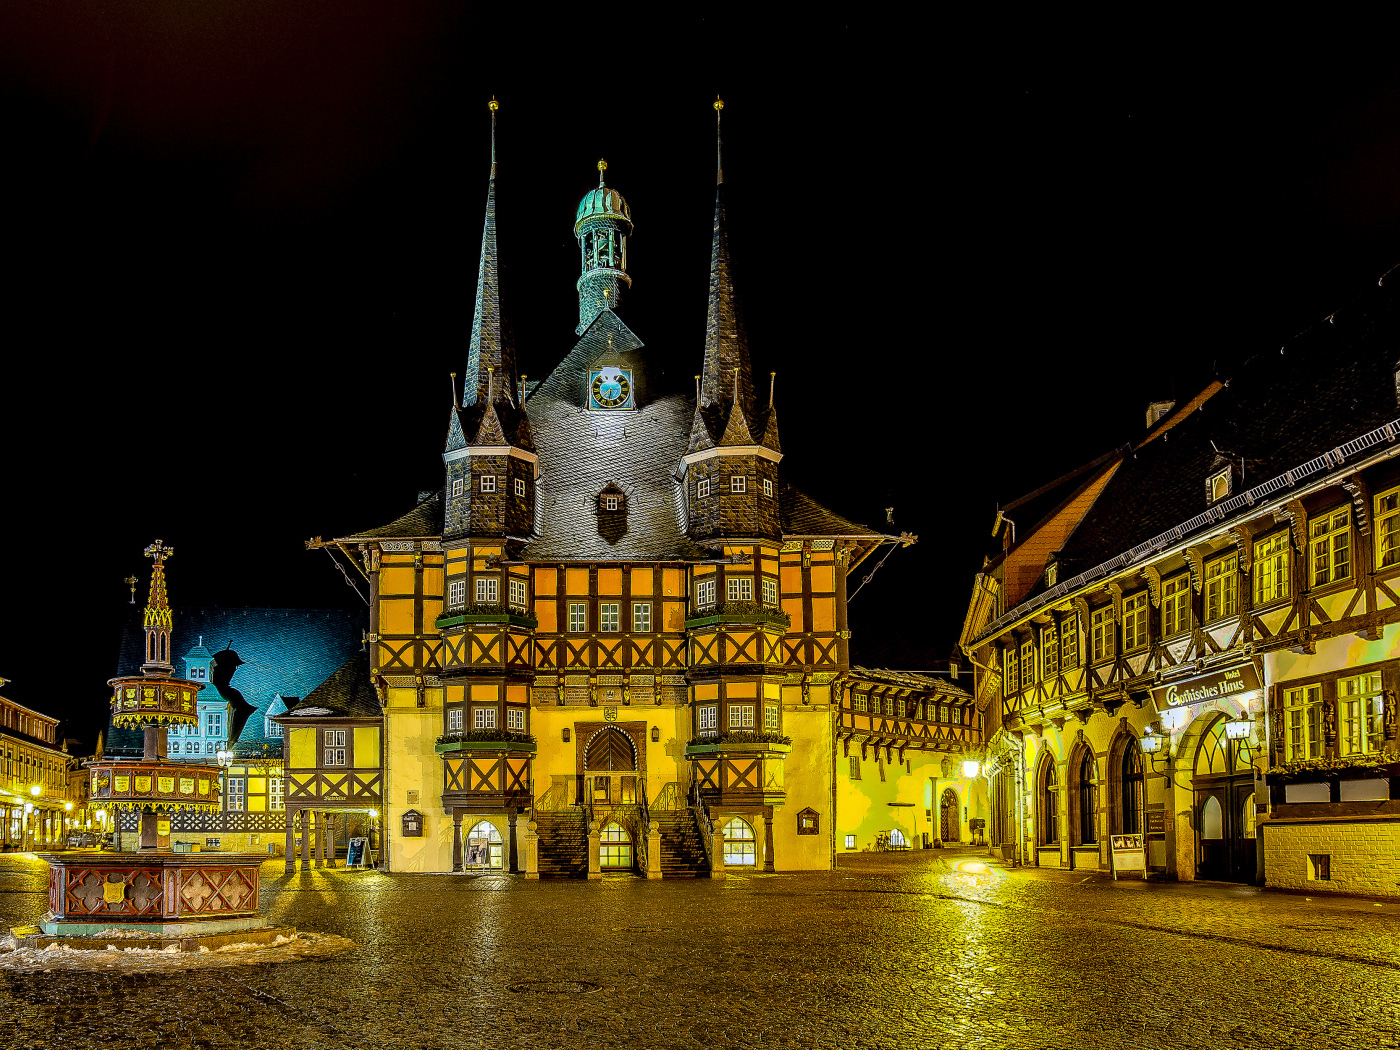 Beautiful house in Wernigerode at night, Germany